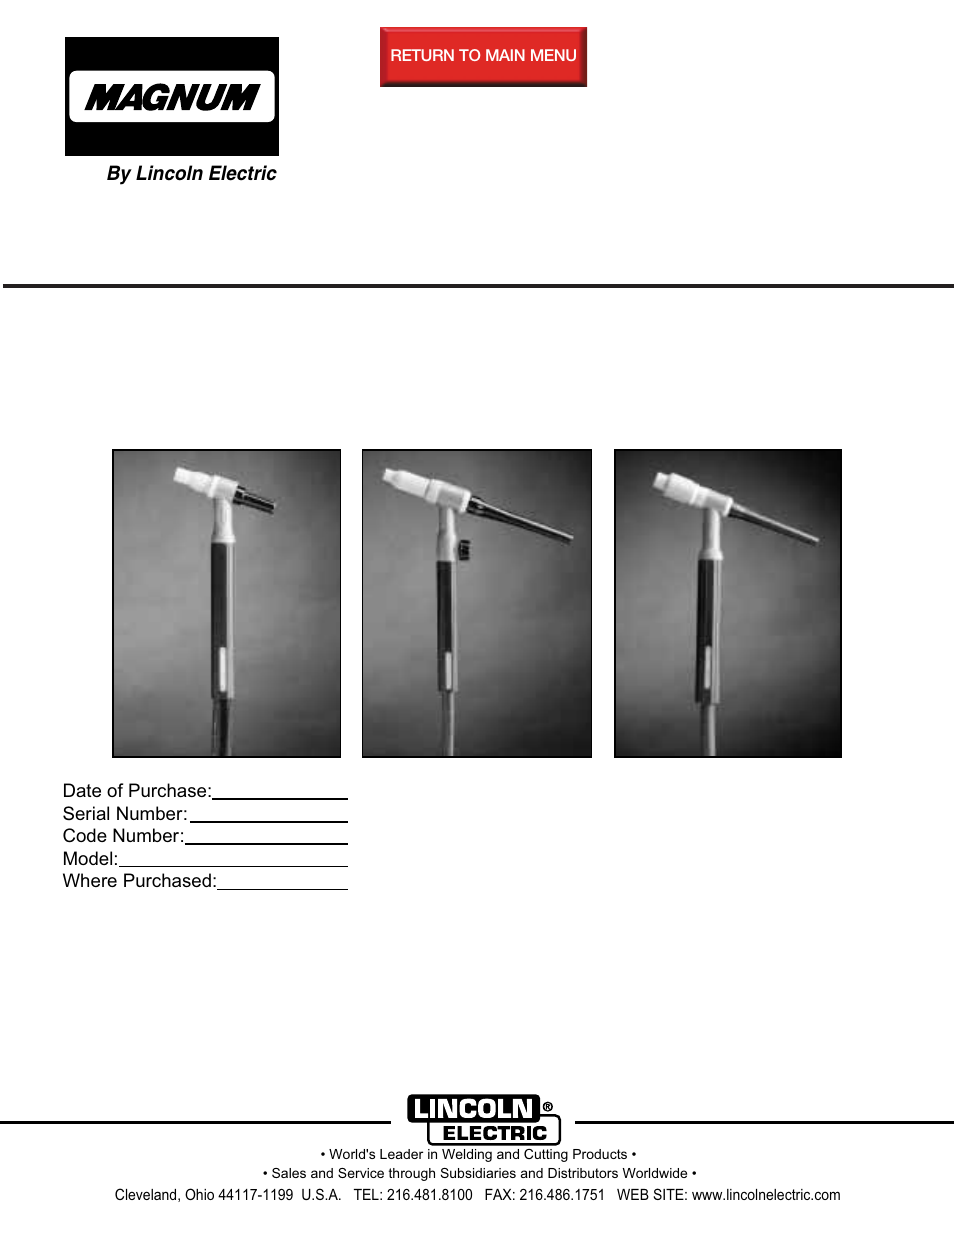 Lincoln Electric MAGNUM LA-9 User Manual | 16 pages